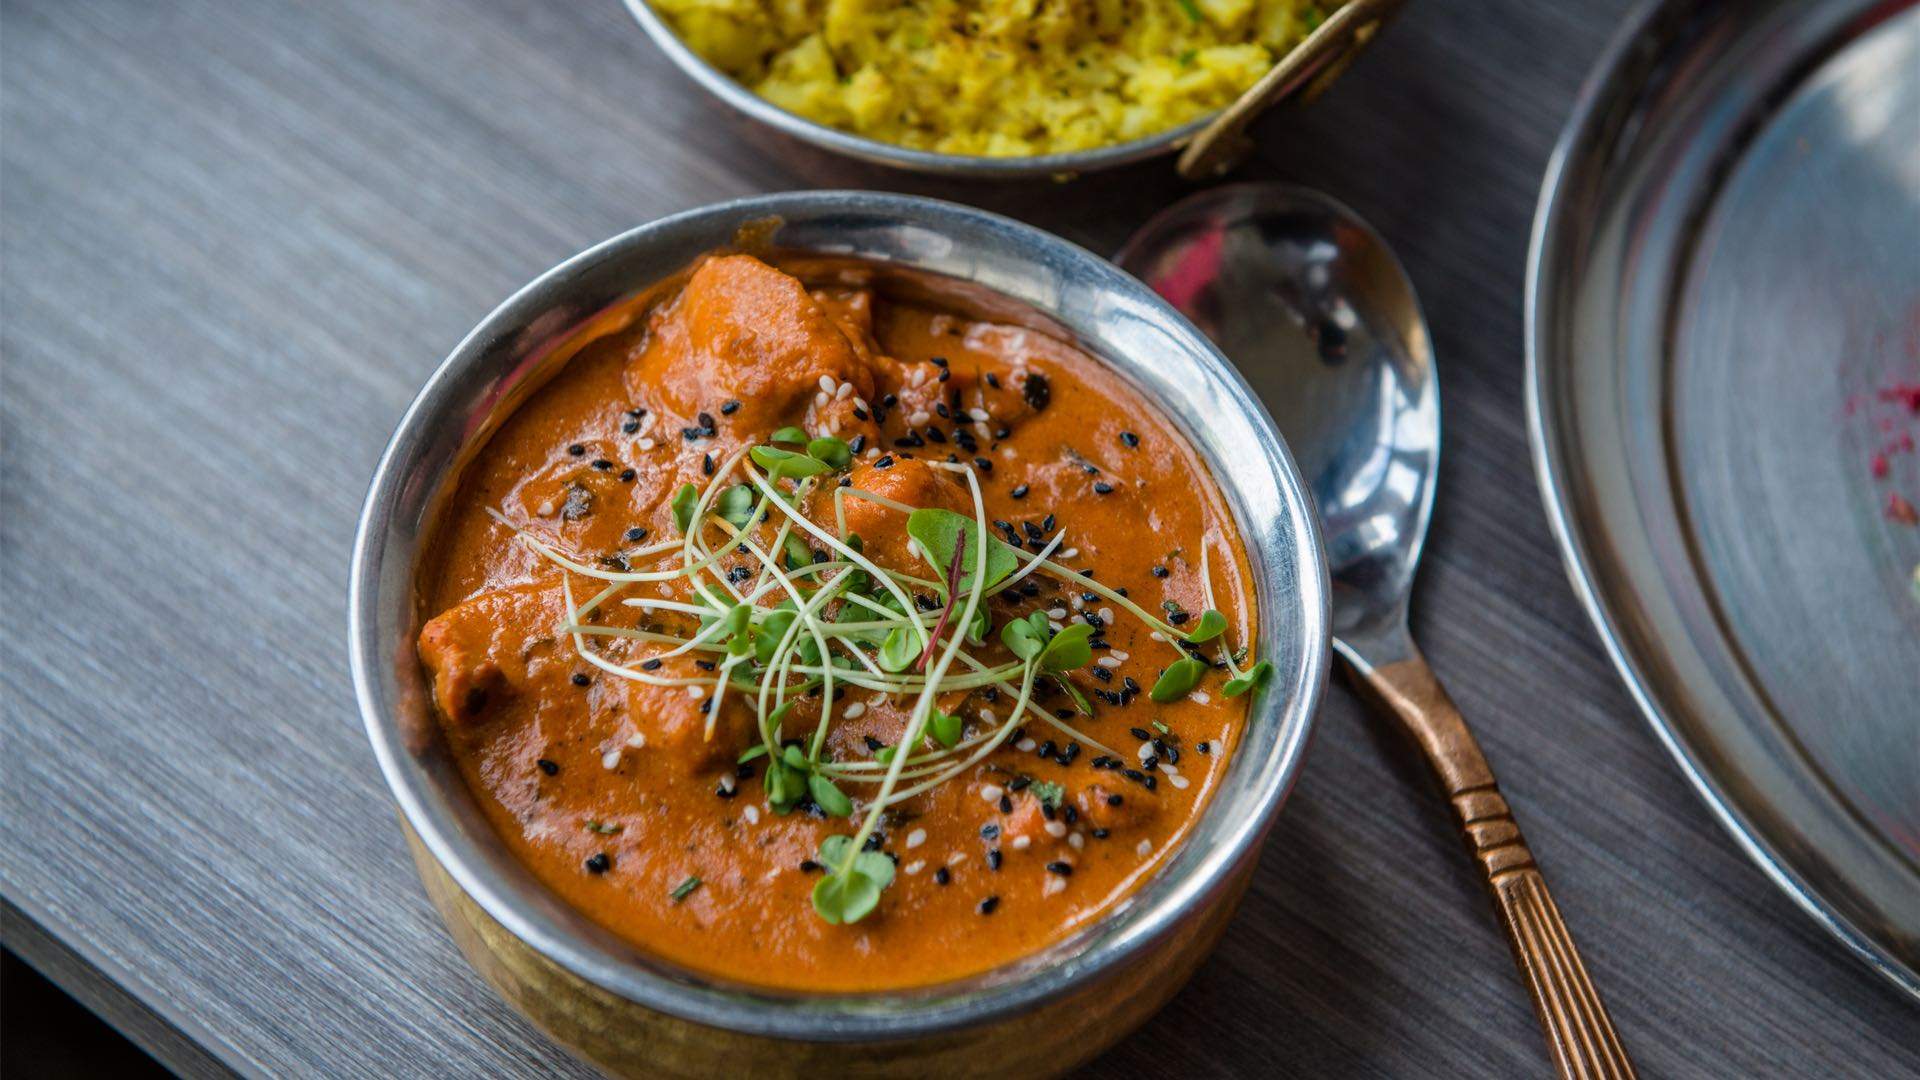 Elichi Is Black Rock's New Modern Indian Eatery From the Babu Ji Team